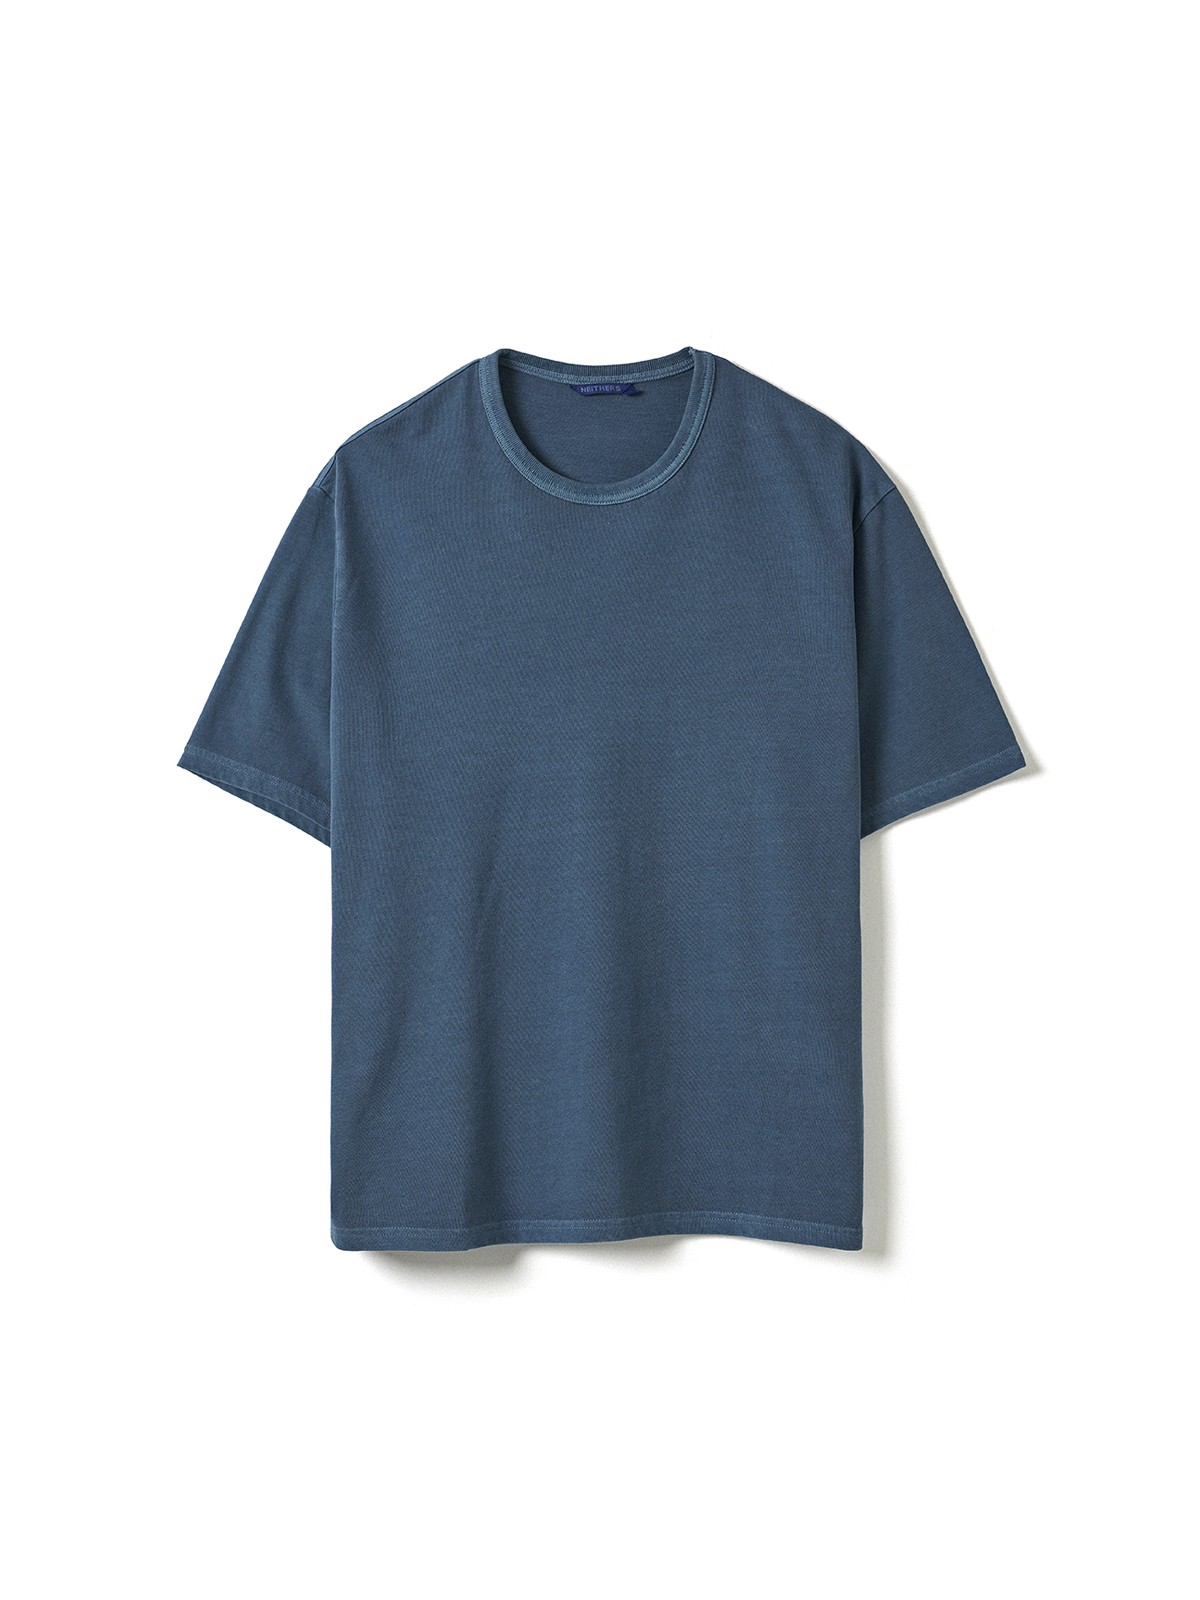 GARMENT DYED S/S T-SHIRT (HEATHER NAVY)